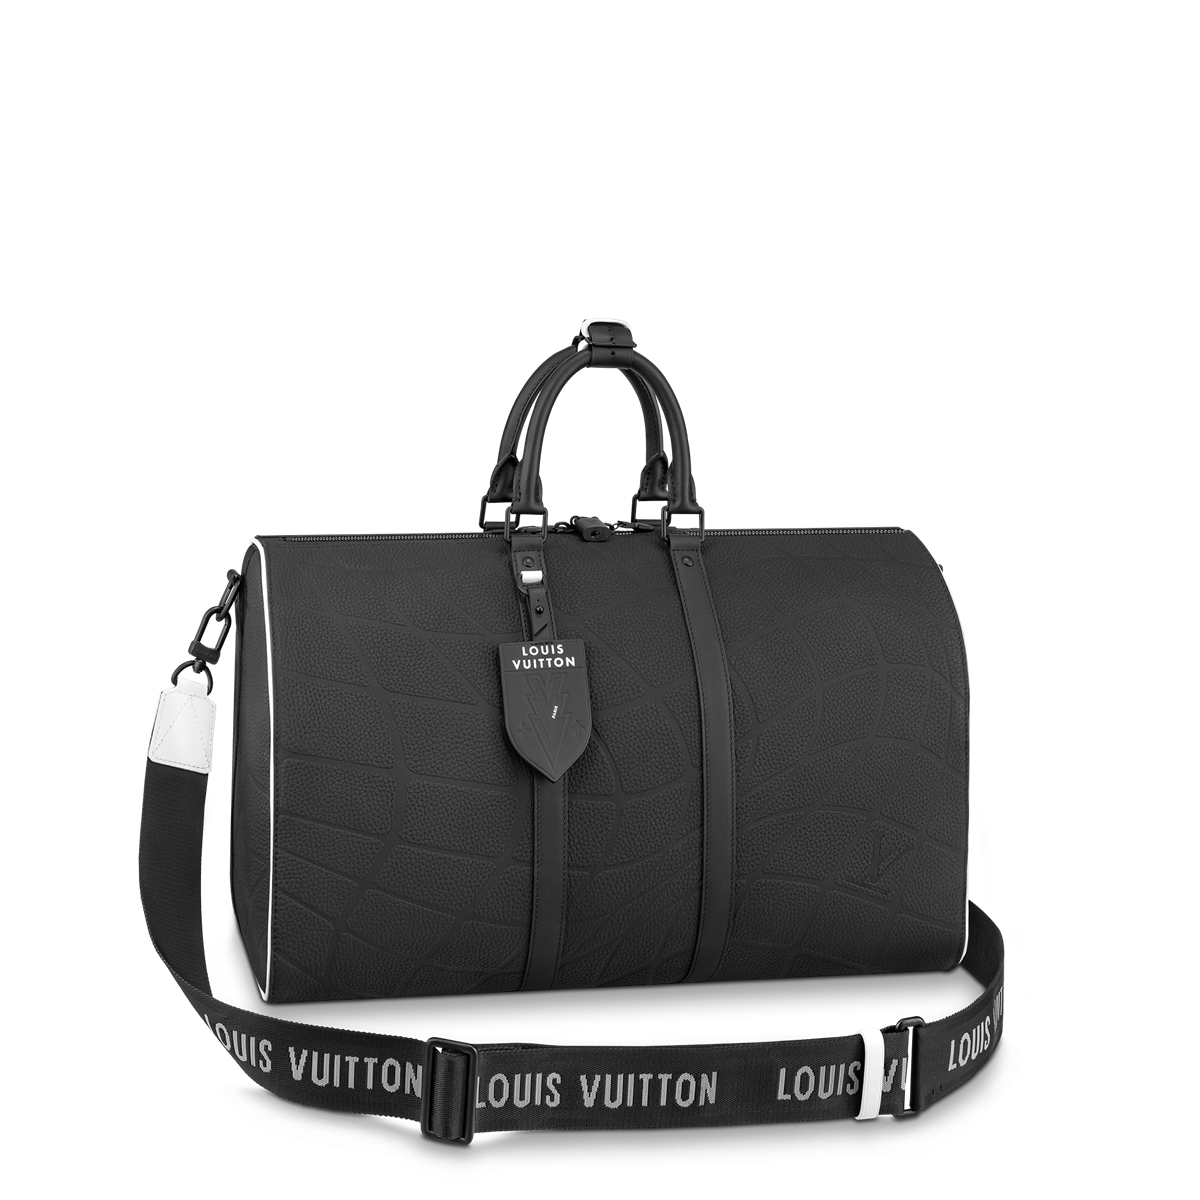 LV_FIFA World Cup Qatar 2022 Capsule Collection_Keepall 50